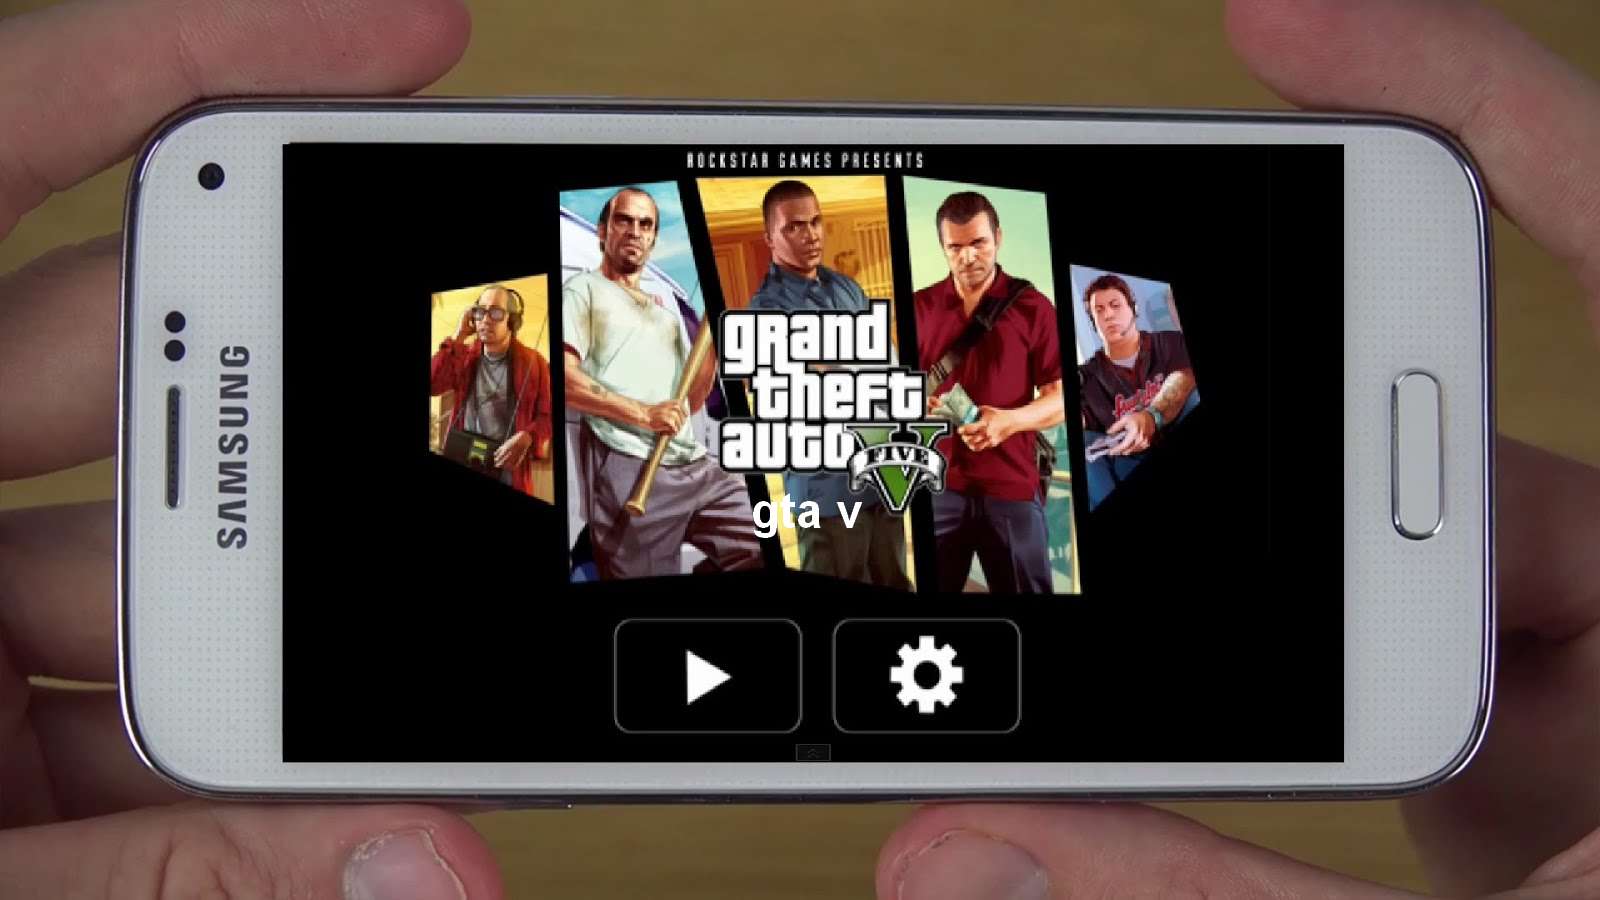 Gta 5 mobile android skachat фото 104